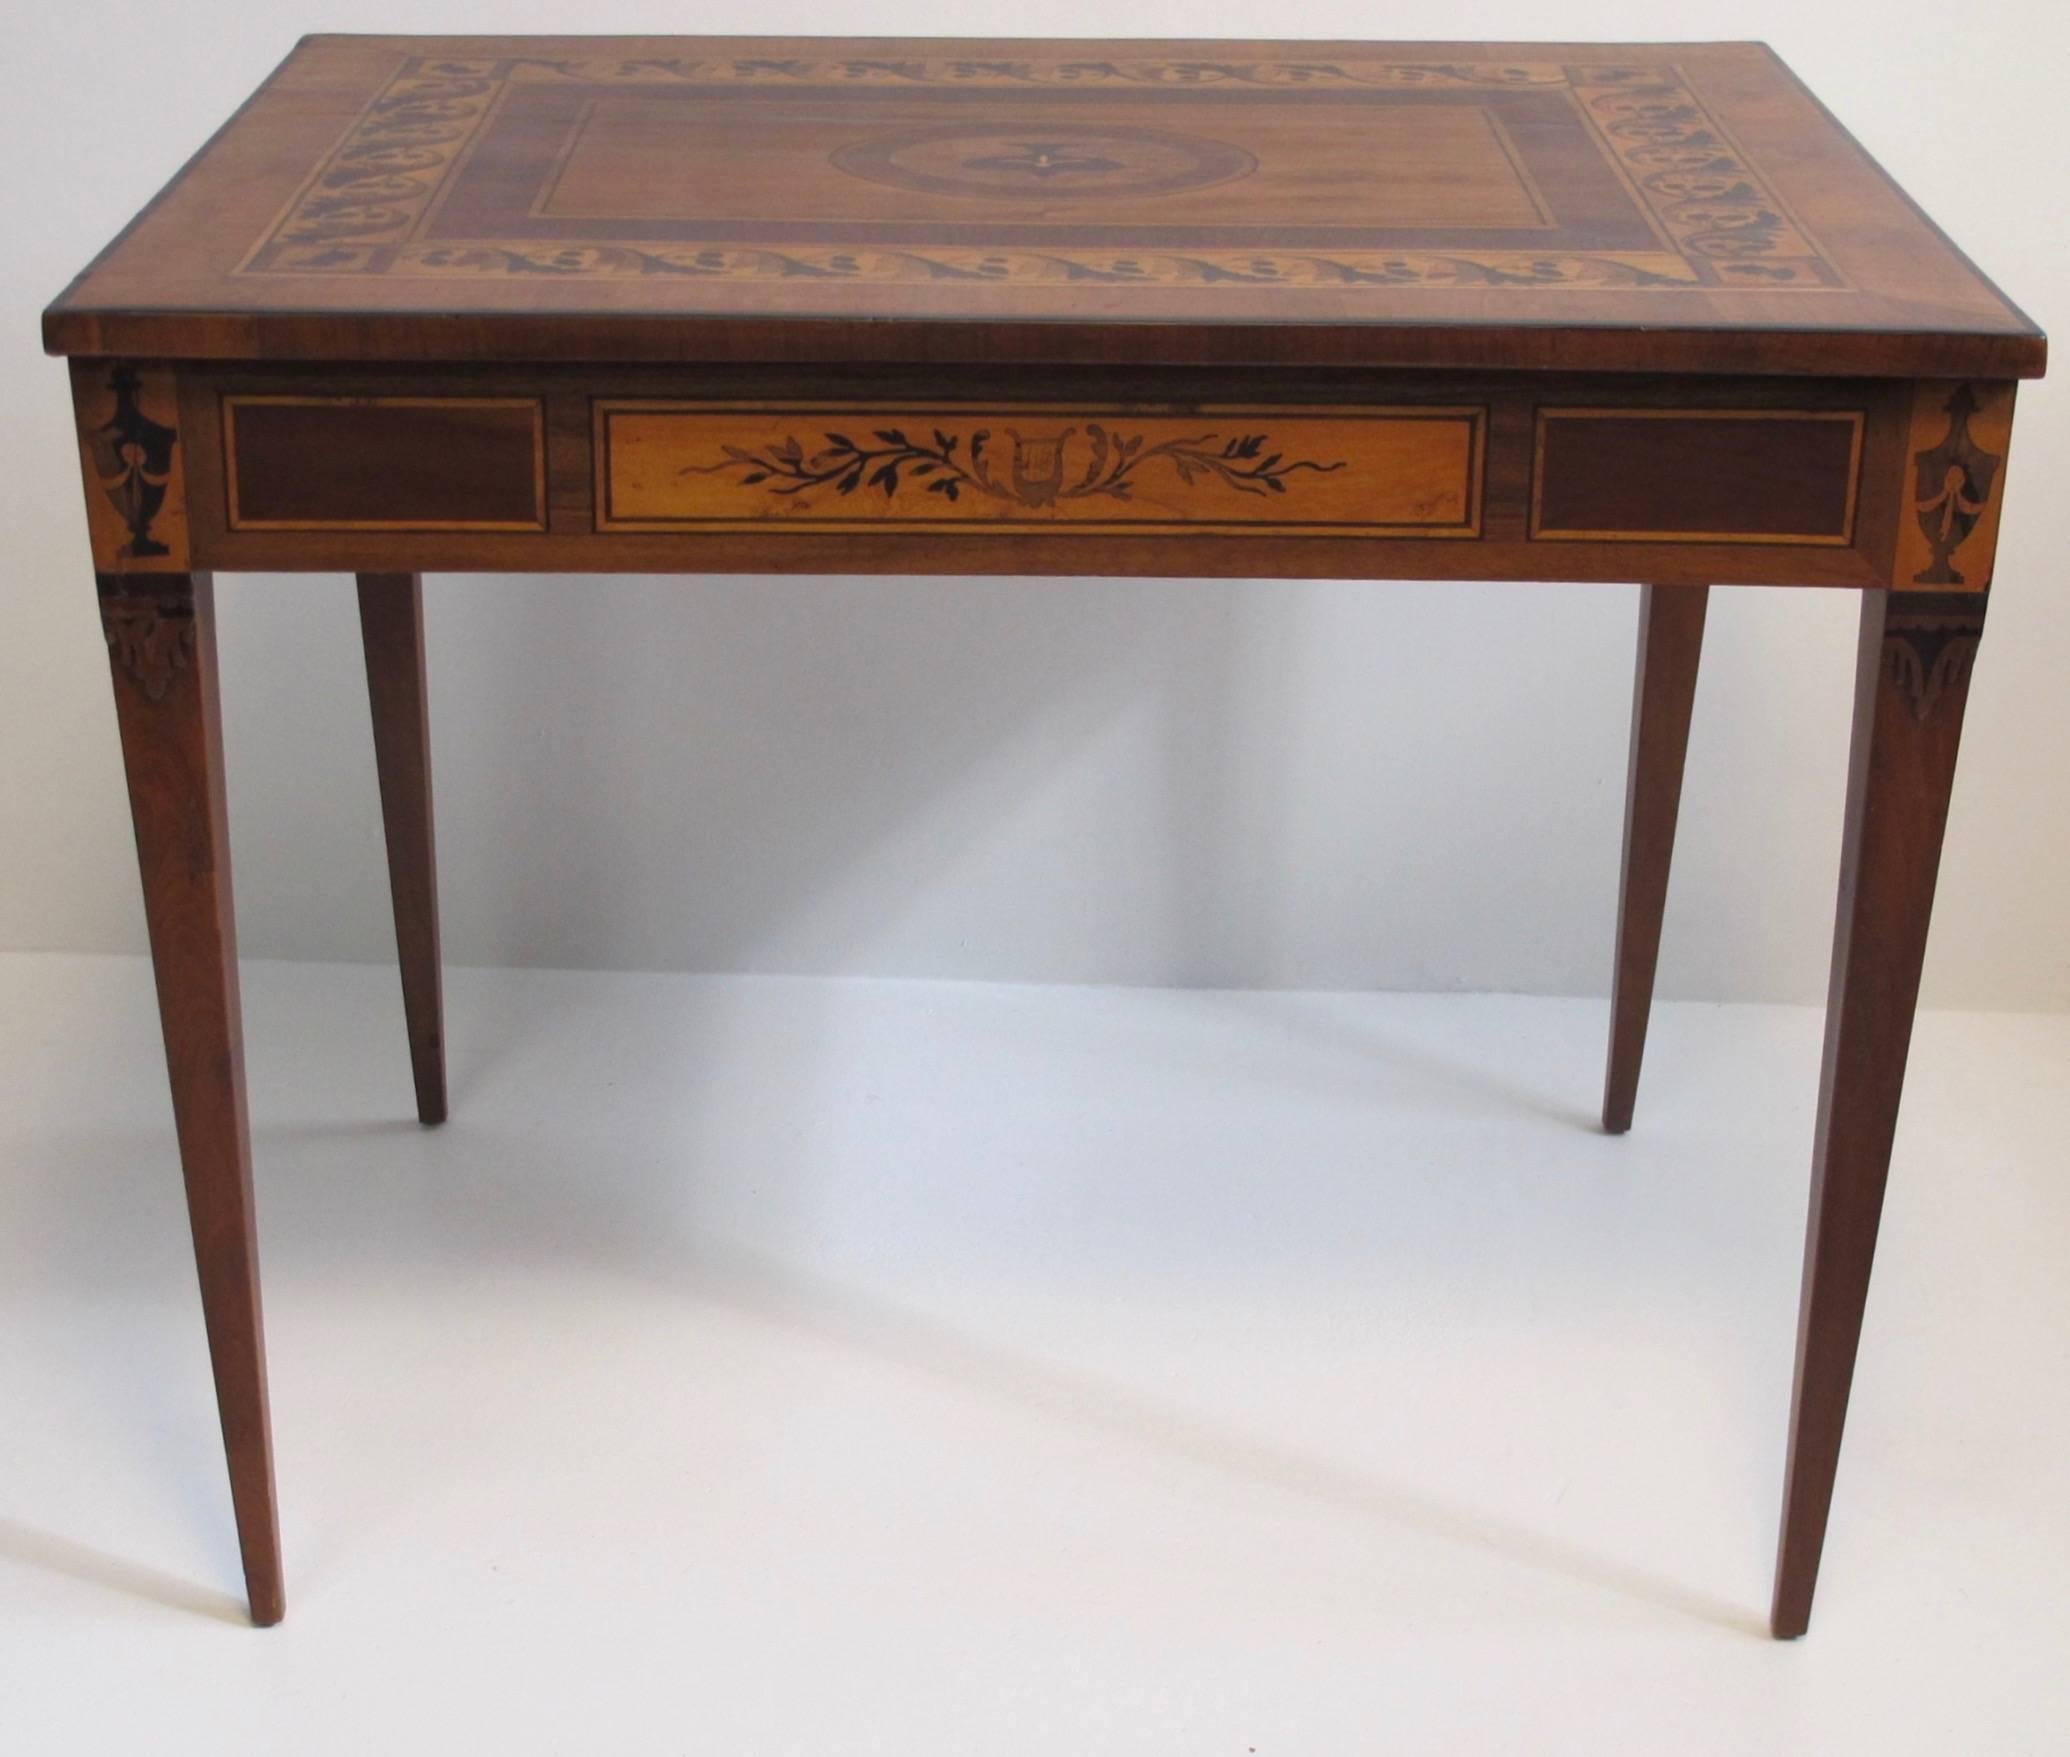 Neoclassical  Italian Parquetry Inlaid Writing Table Desk, 18th Century For Sale